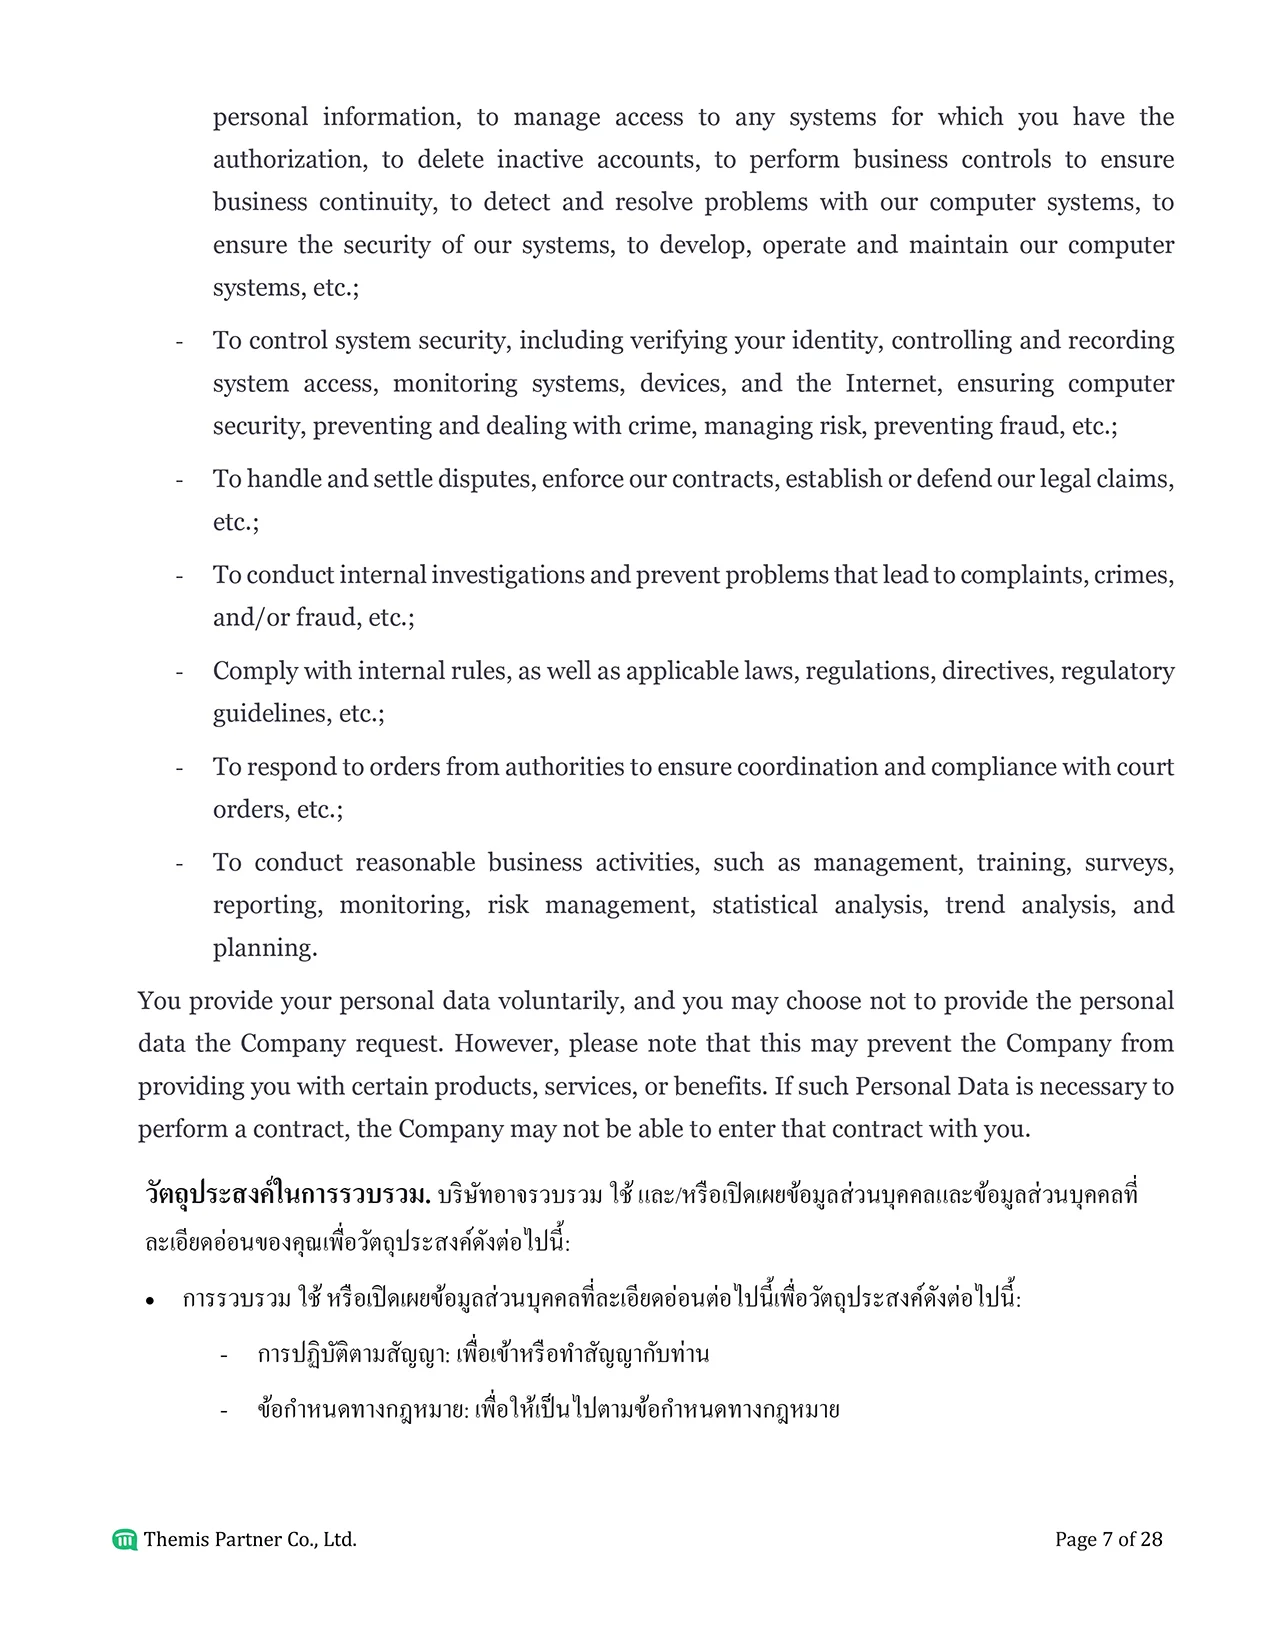 PDPA consent form and company policy Thailand 7